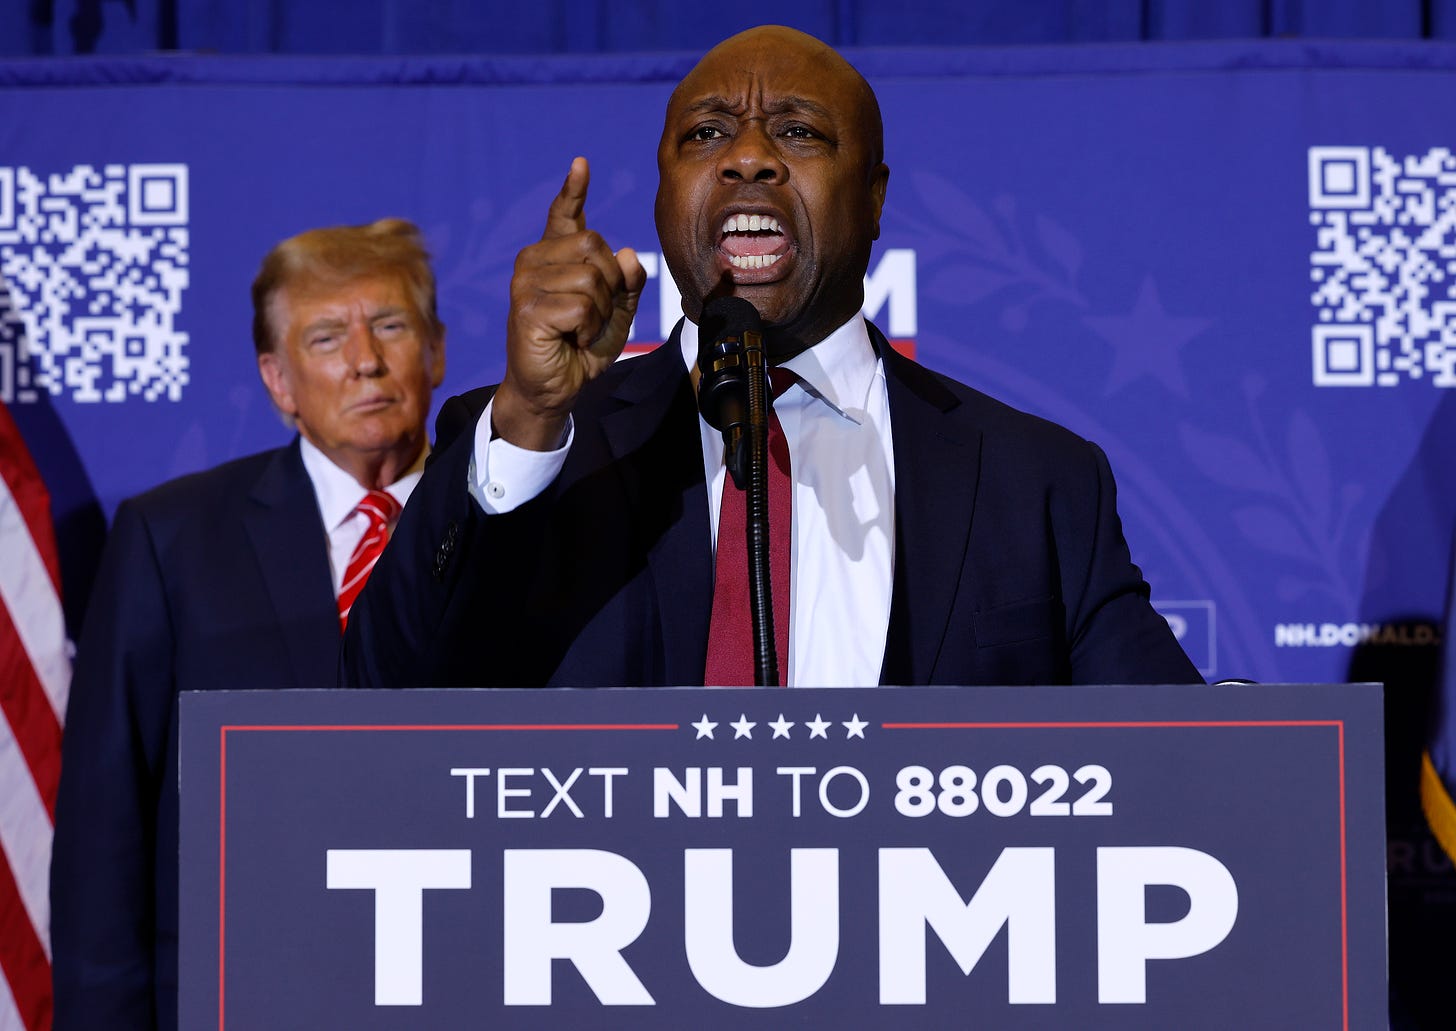 Tim Scott speaks during a campaign rally in Concord, New Hampshire. (Photo by Chip Somodevilla via Getty Images.)